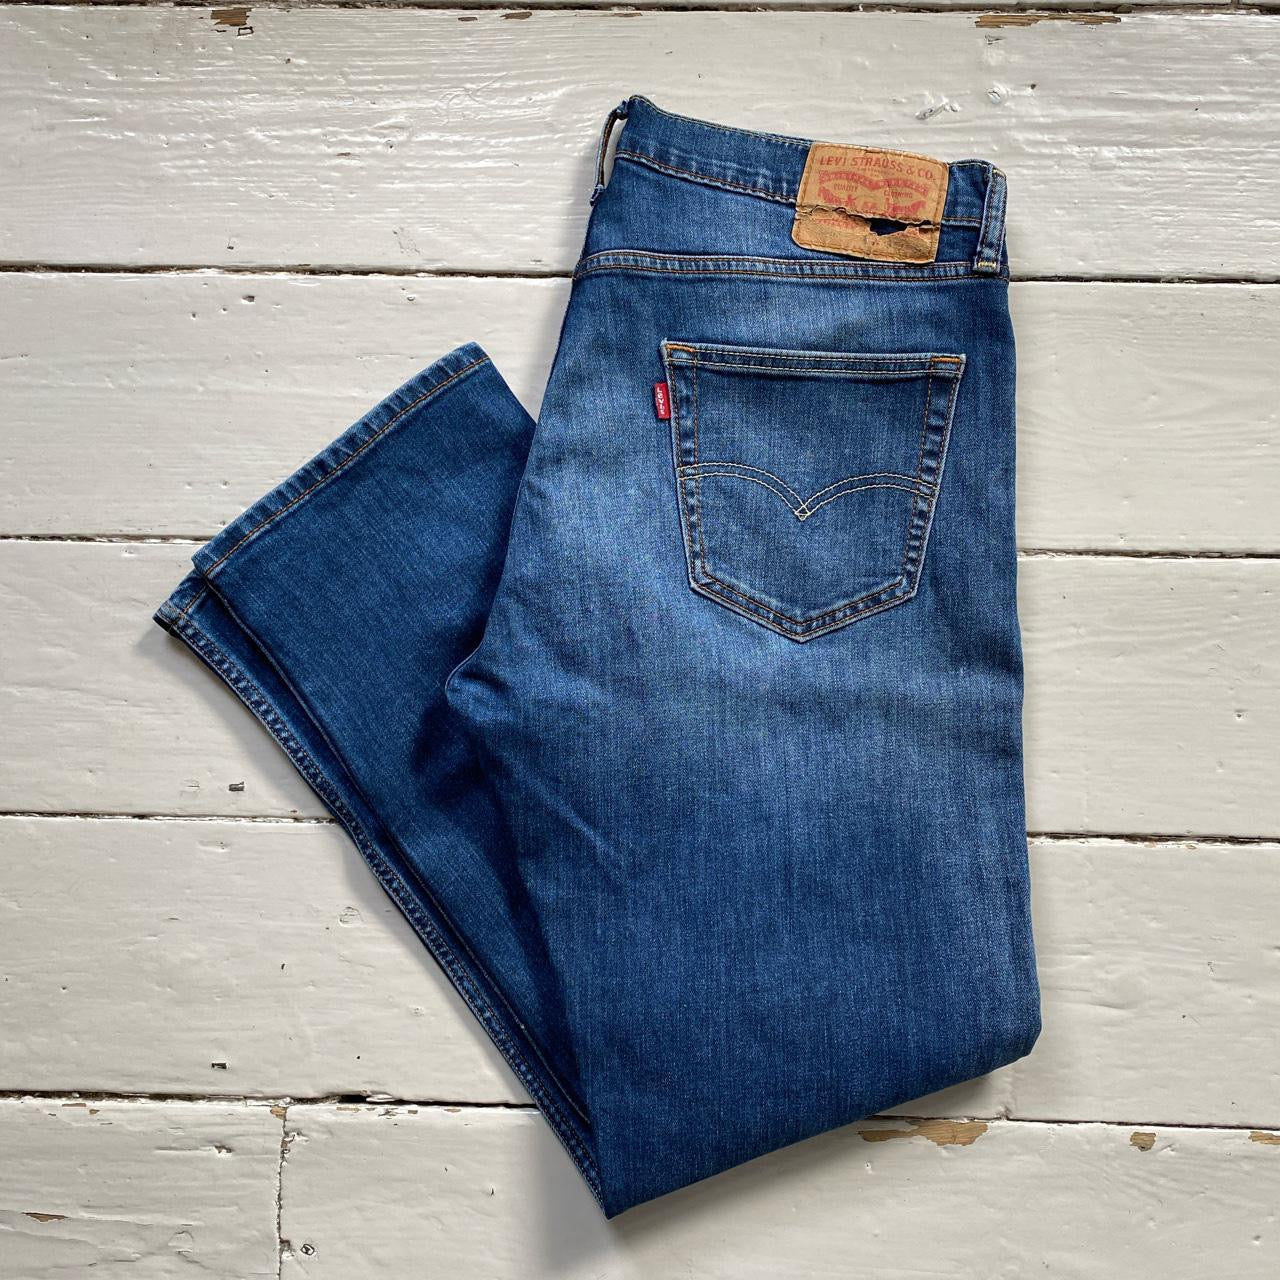 Levis 501 Stone Washed Jeans (34/29)